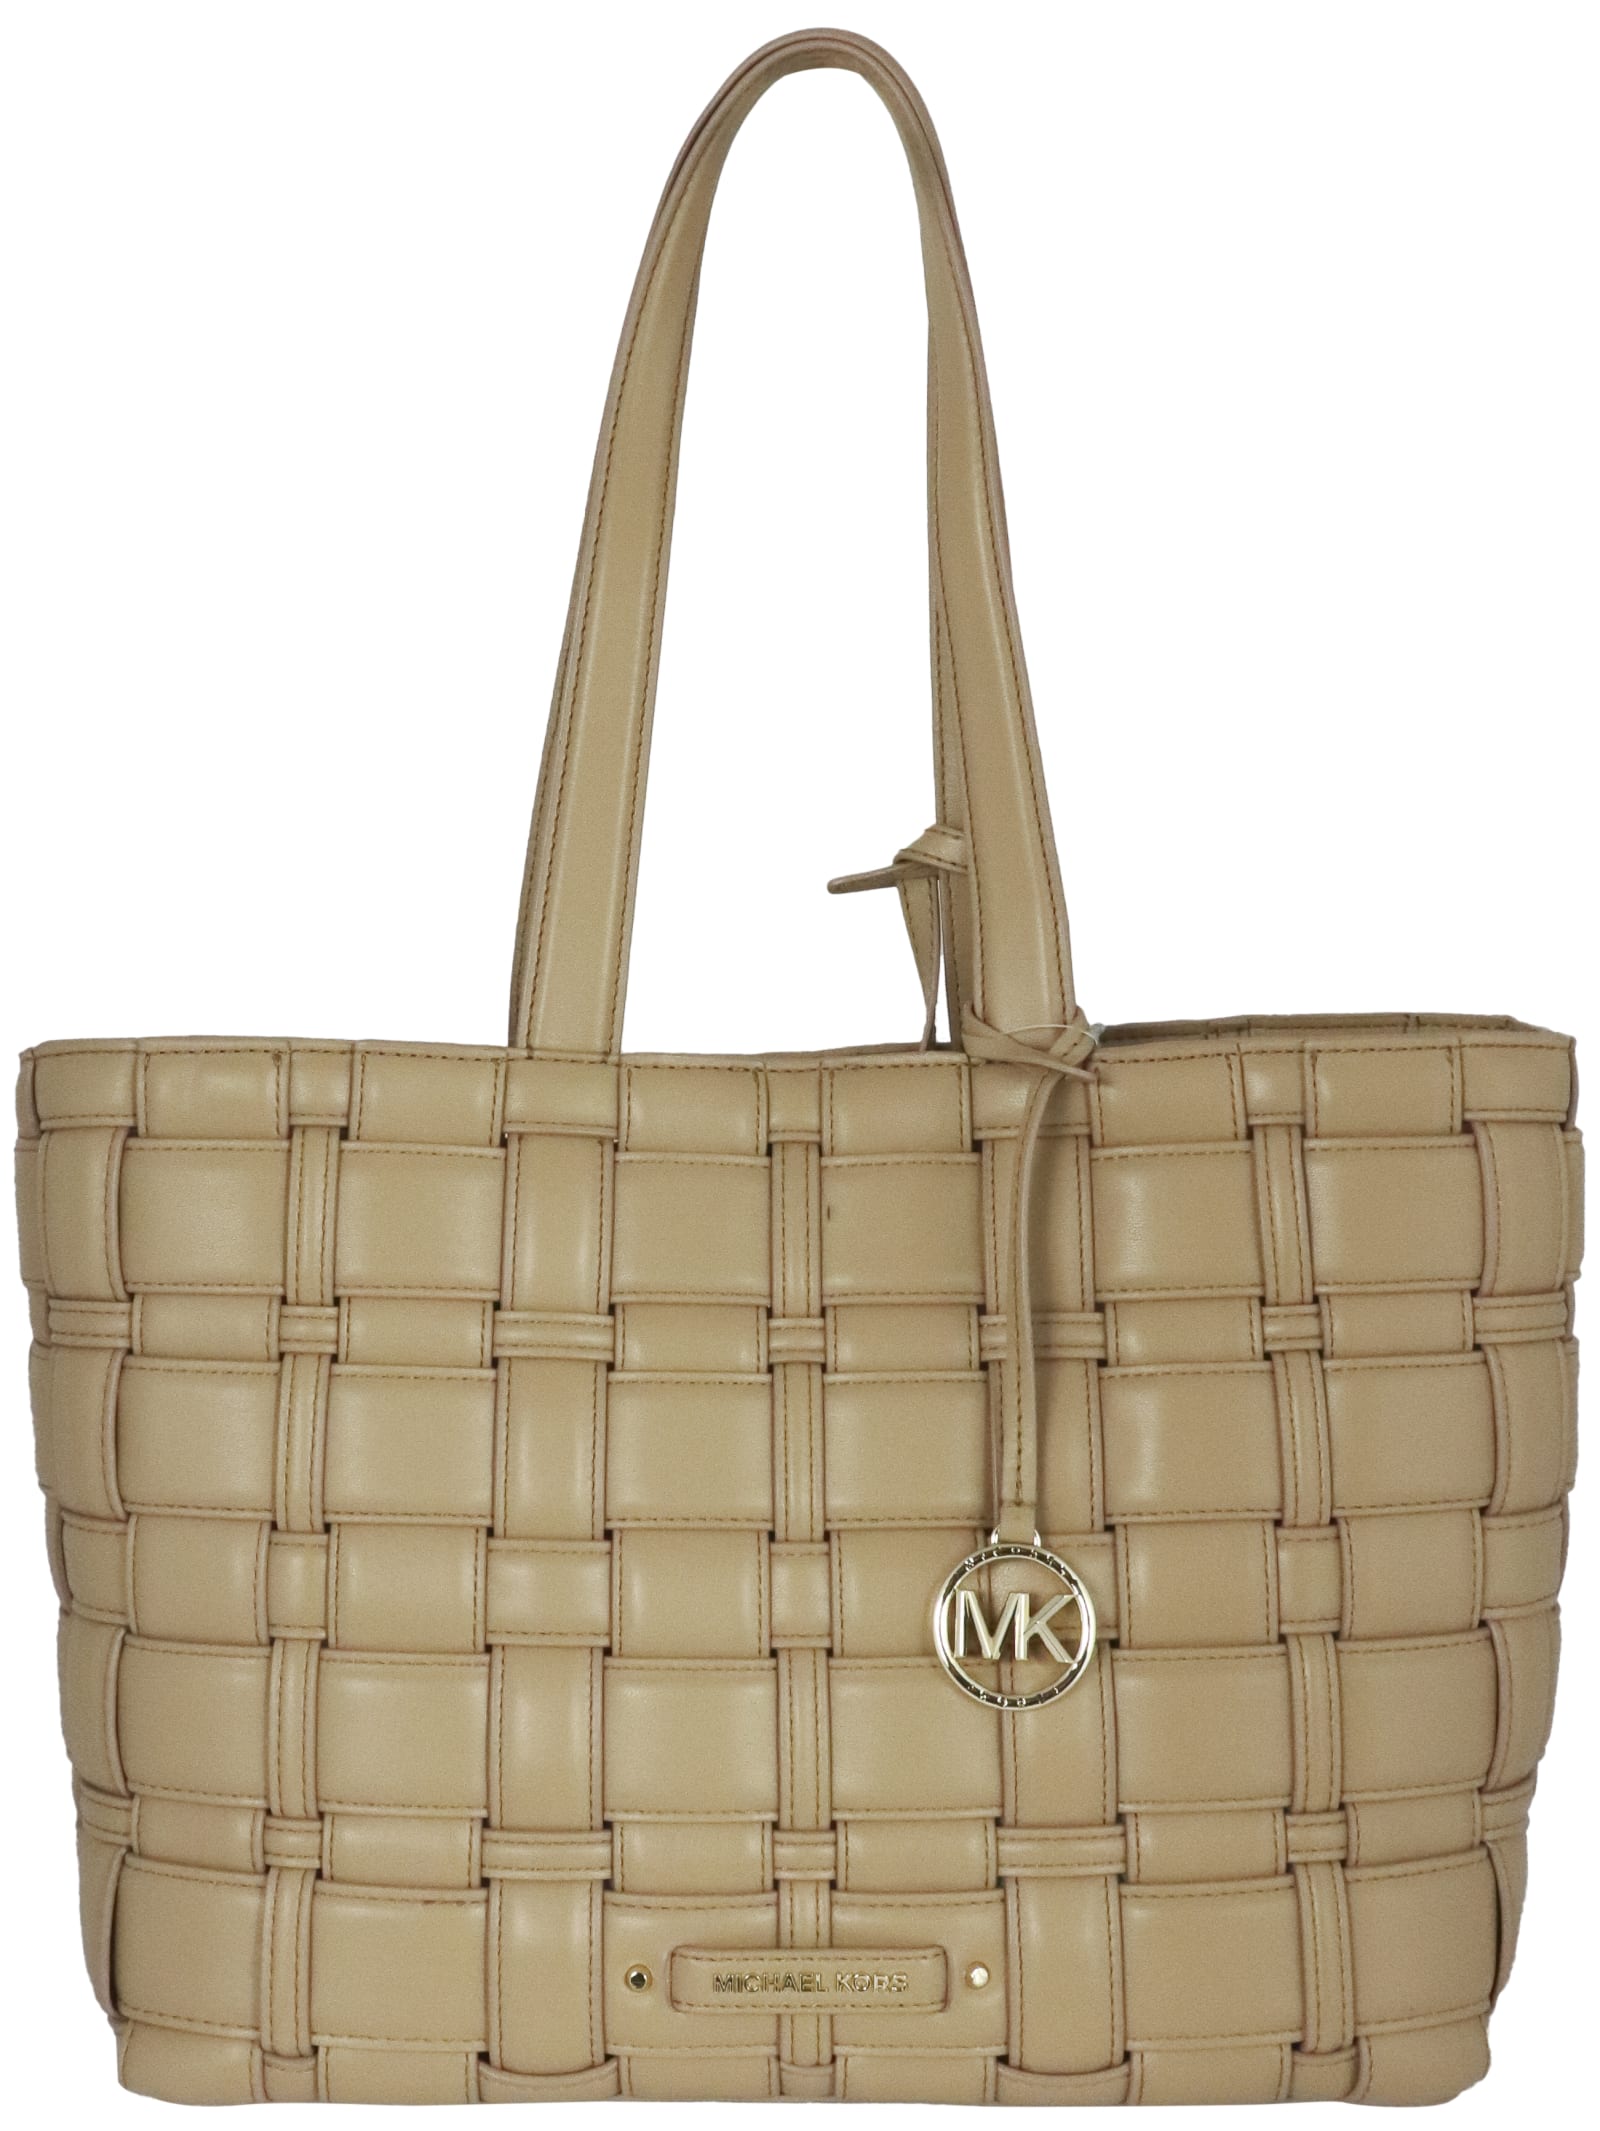 Michael Kors Ivy Md Tote Tote